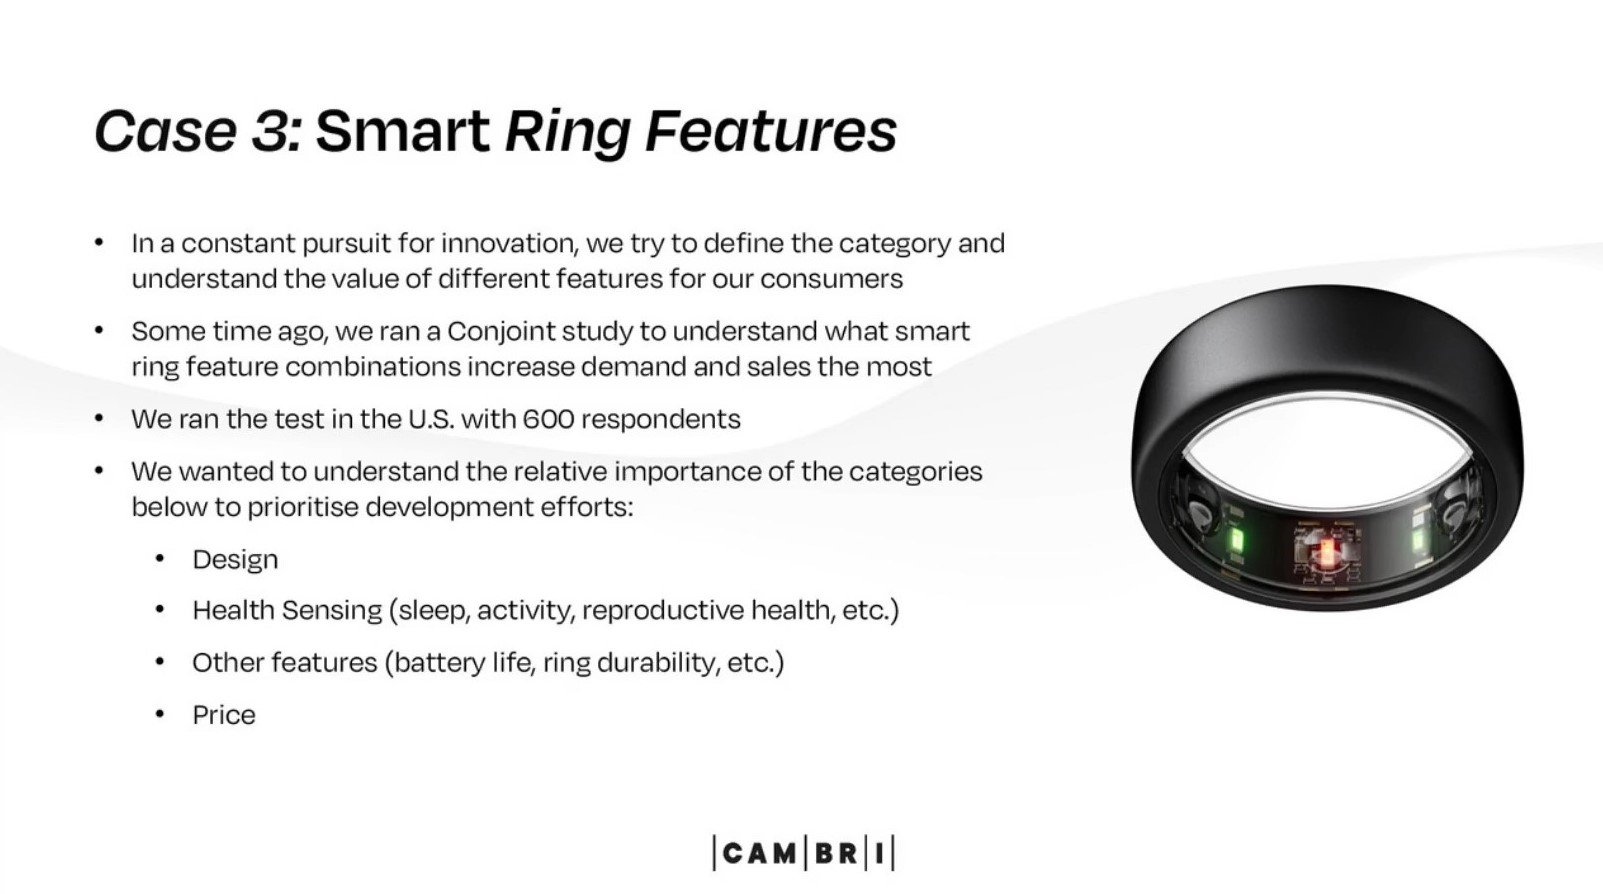 Case study 3: Defining and prioritising smart ring features